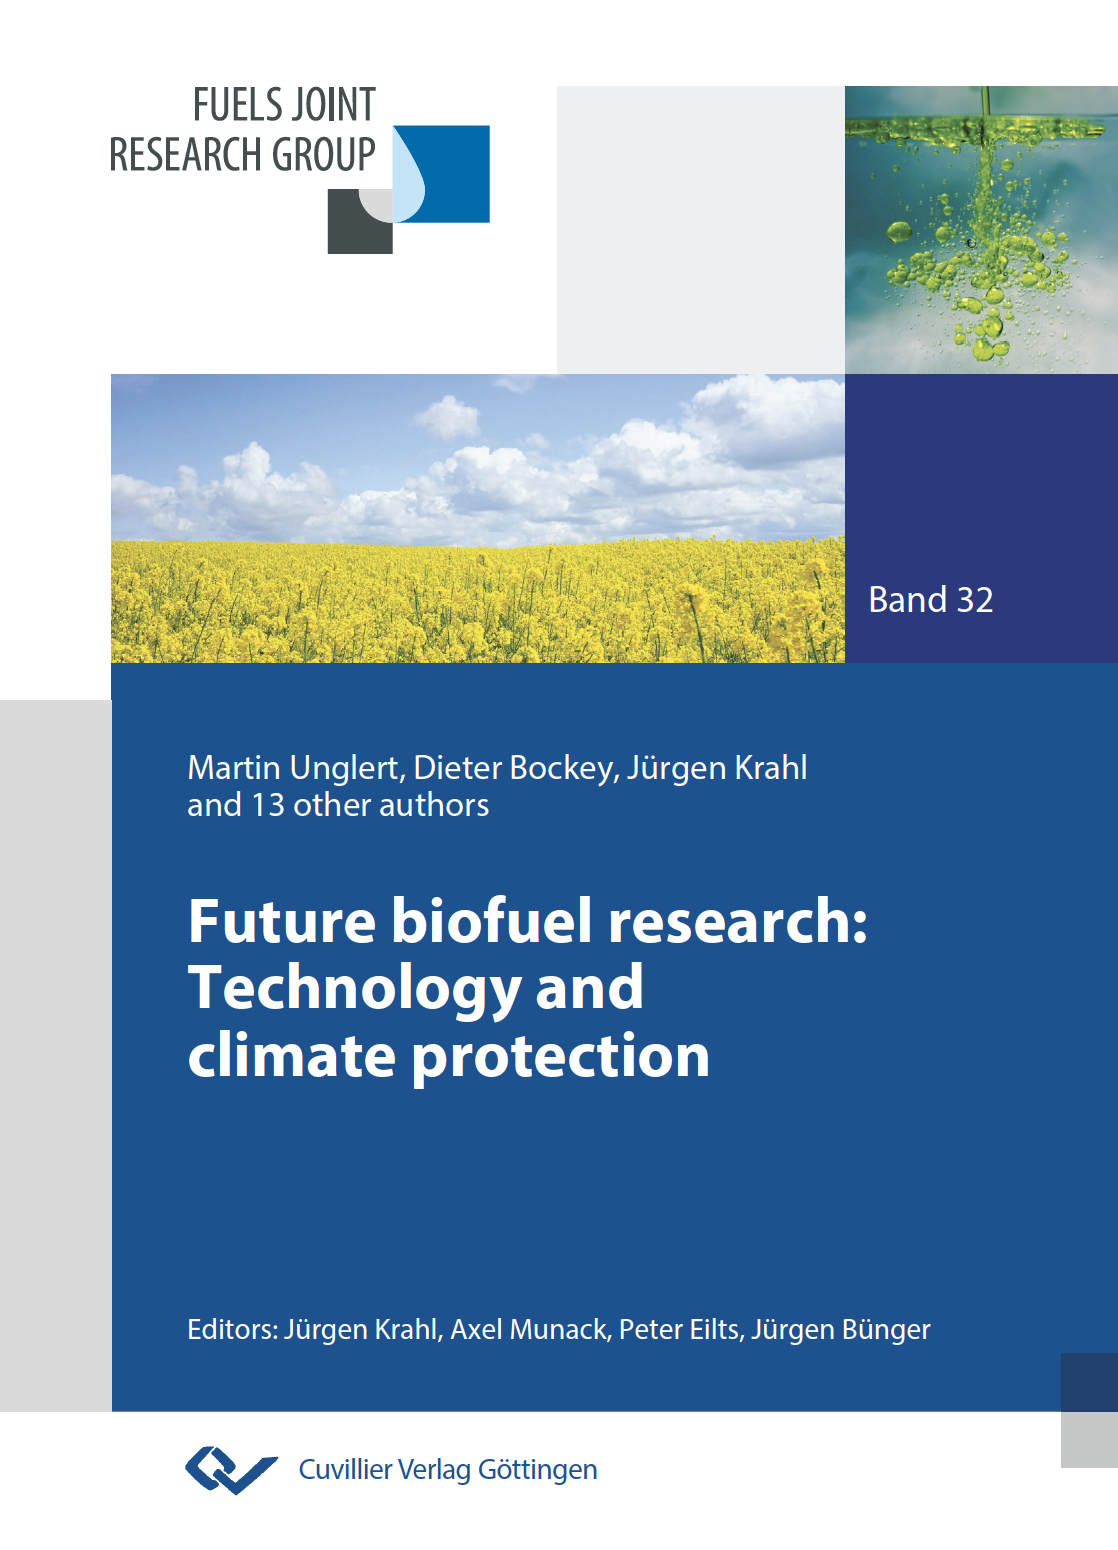 research paper of biofuel